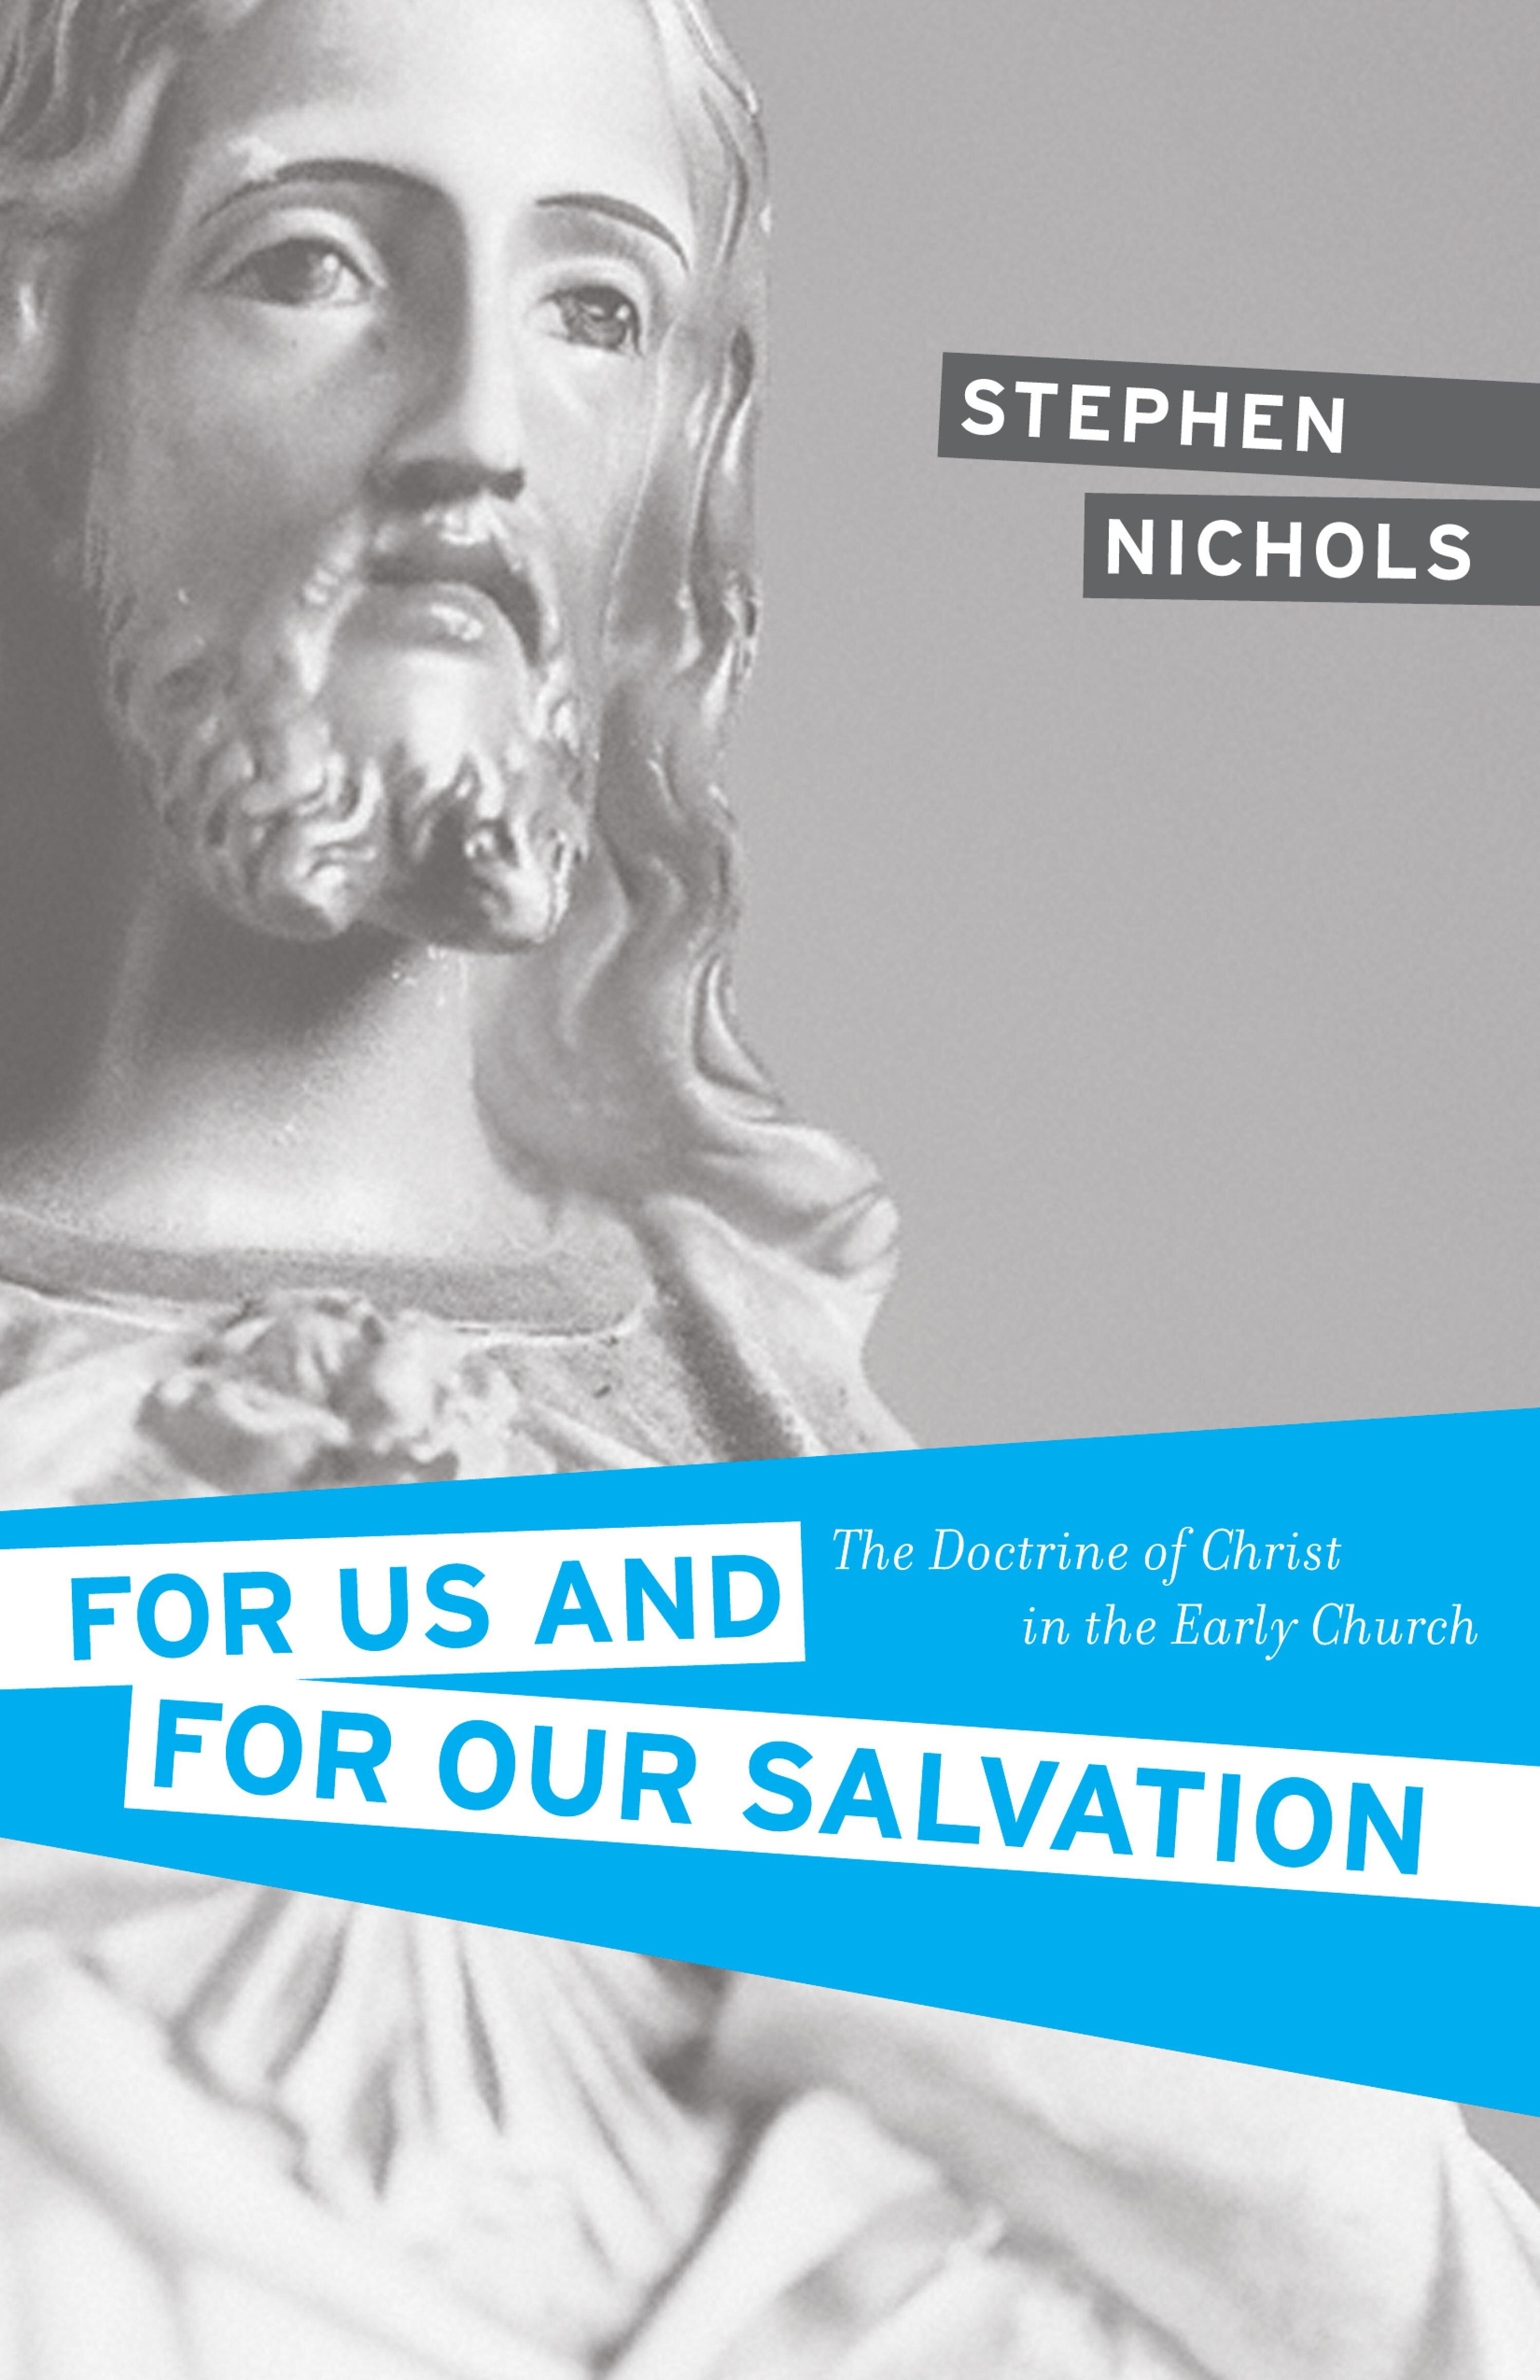 For Us and for Our Salvation: The Doctrine of Christ in the Early Church